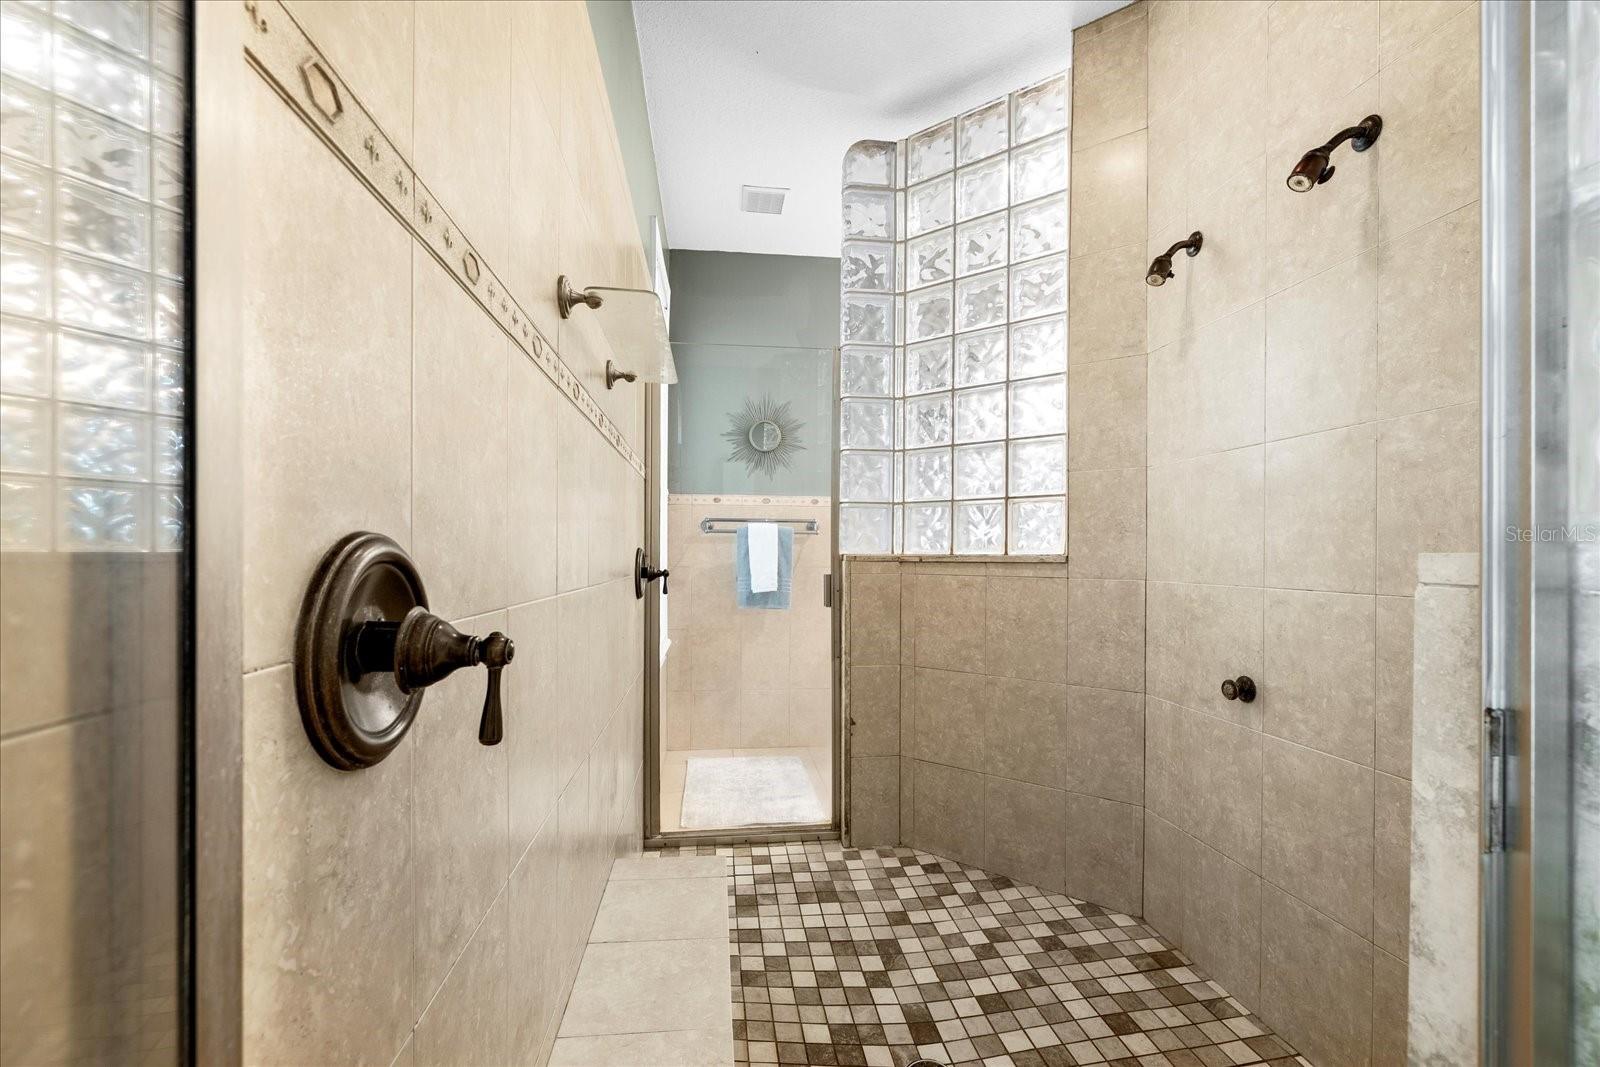 Dual entry shower.